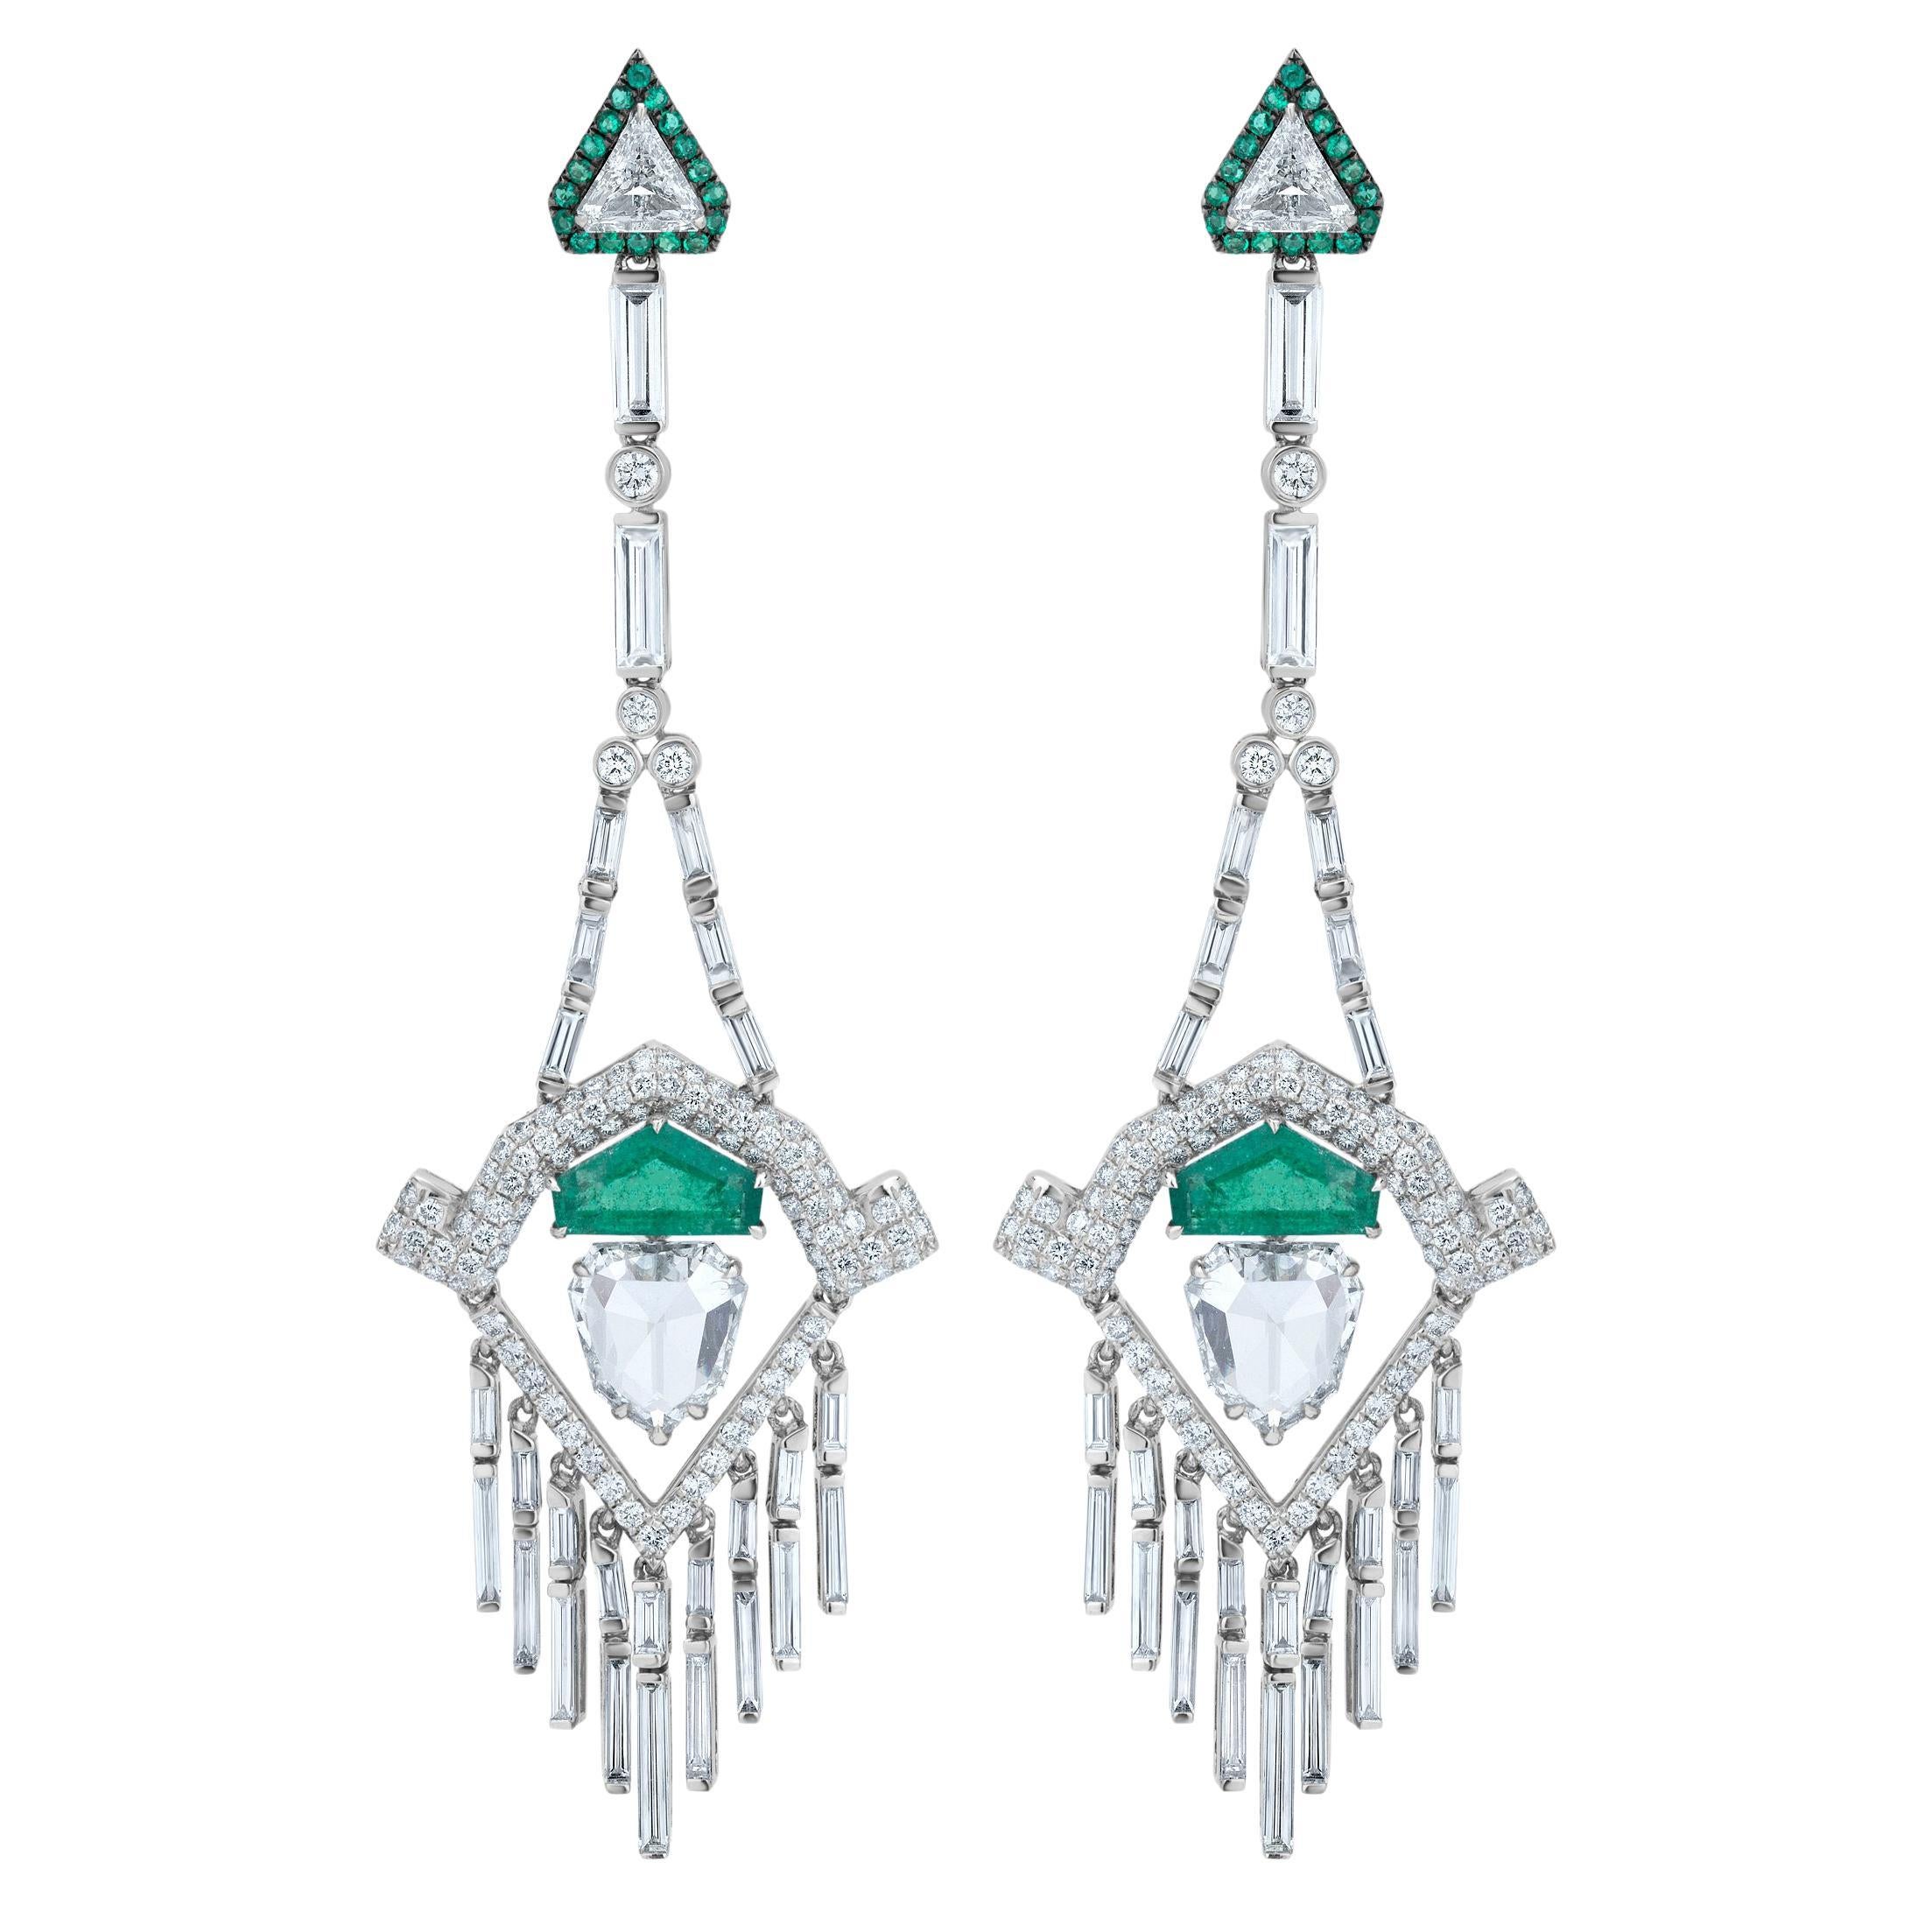 This Nigaam, Chandelier earring in 18k White Gold  is a fine amalgamation of Emerald and Diamond. The triangular surmount has the finesse of triangle-cut diamond surrounded with round-cut emeralds that form a rim around it. The bail is accentuated